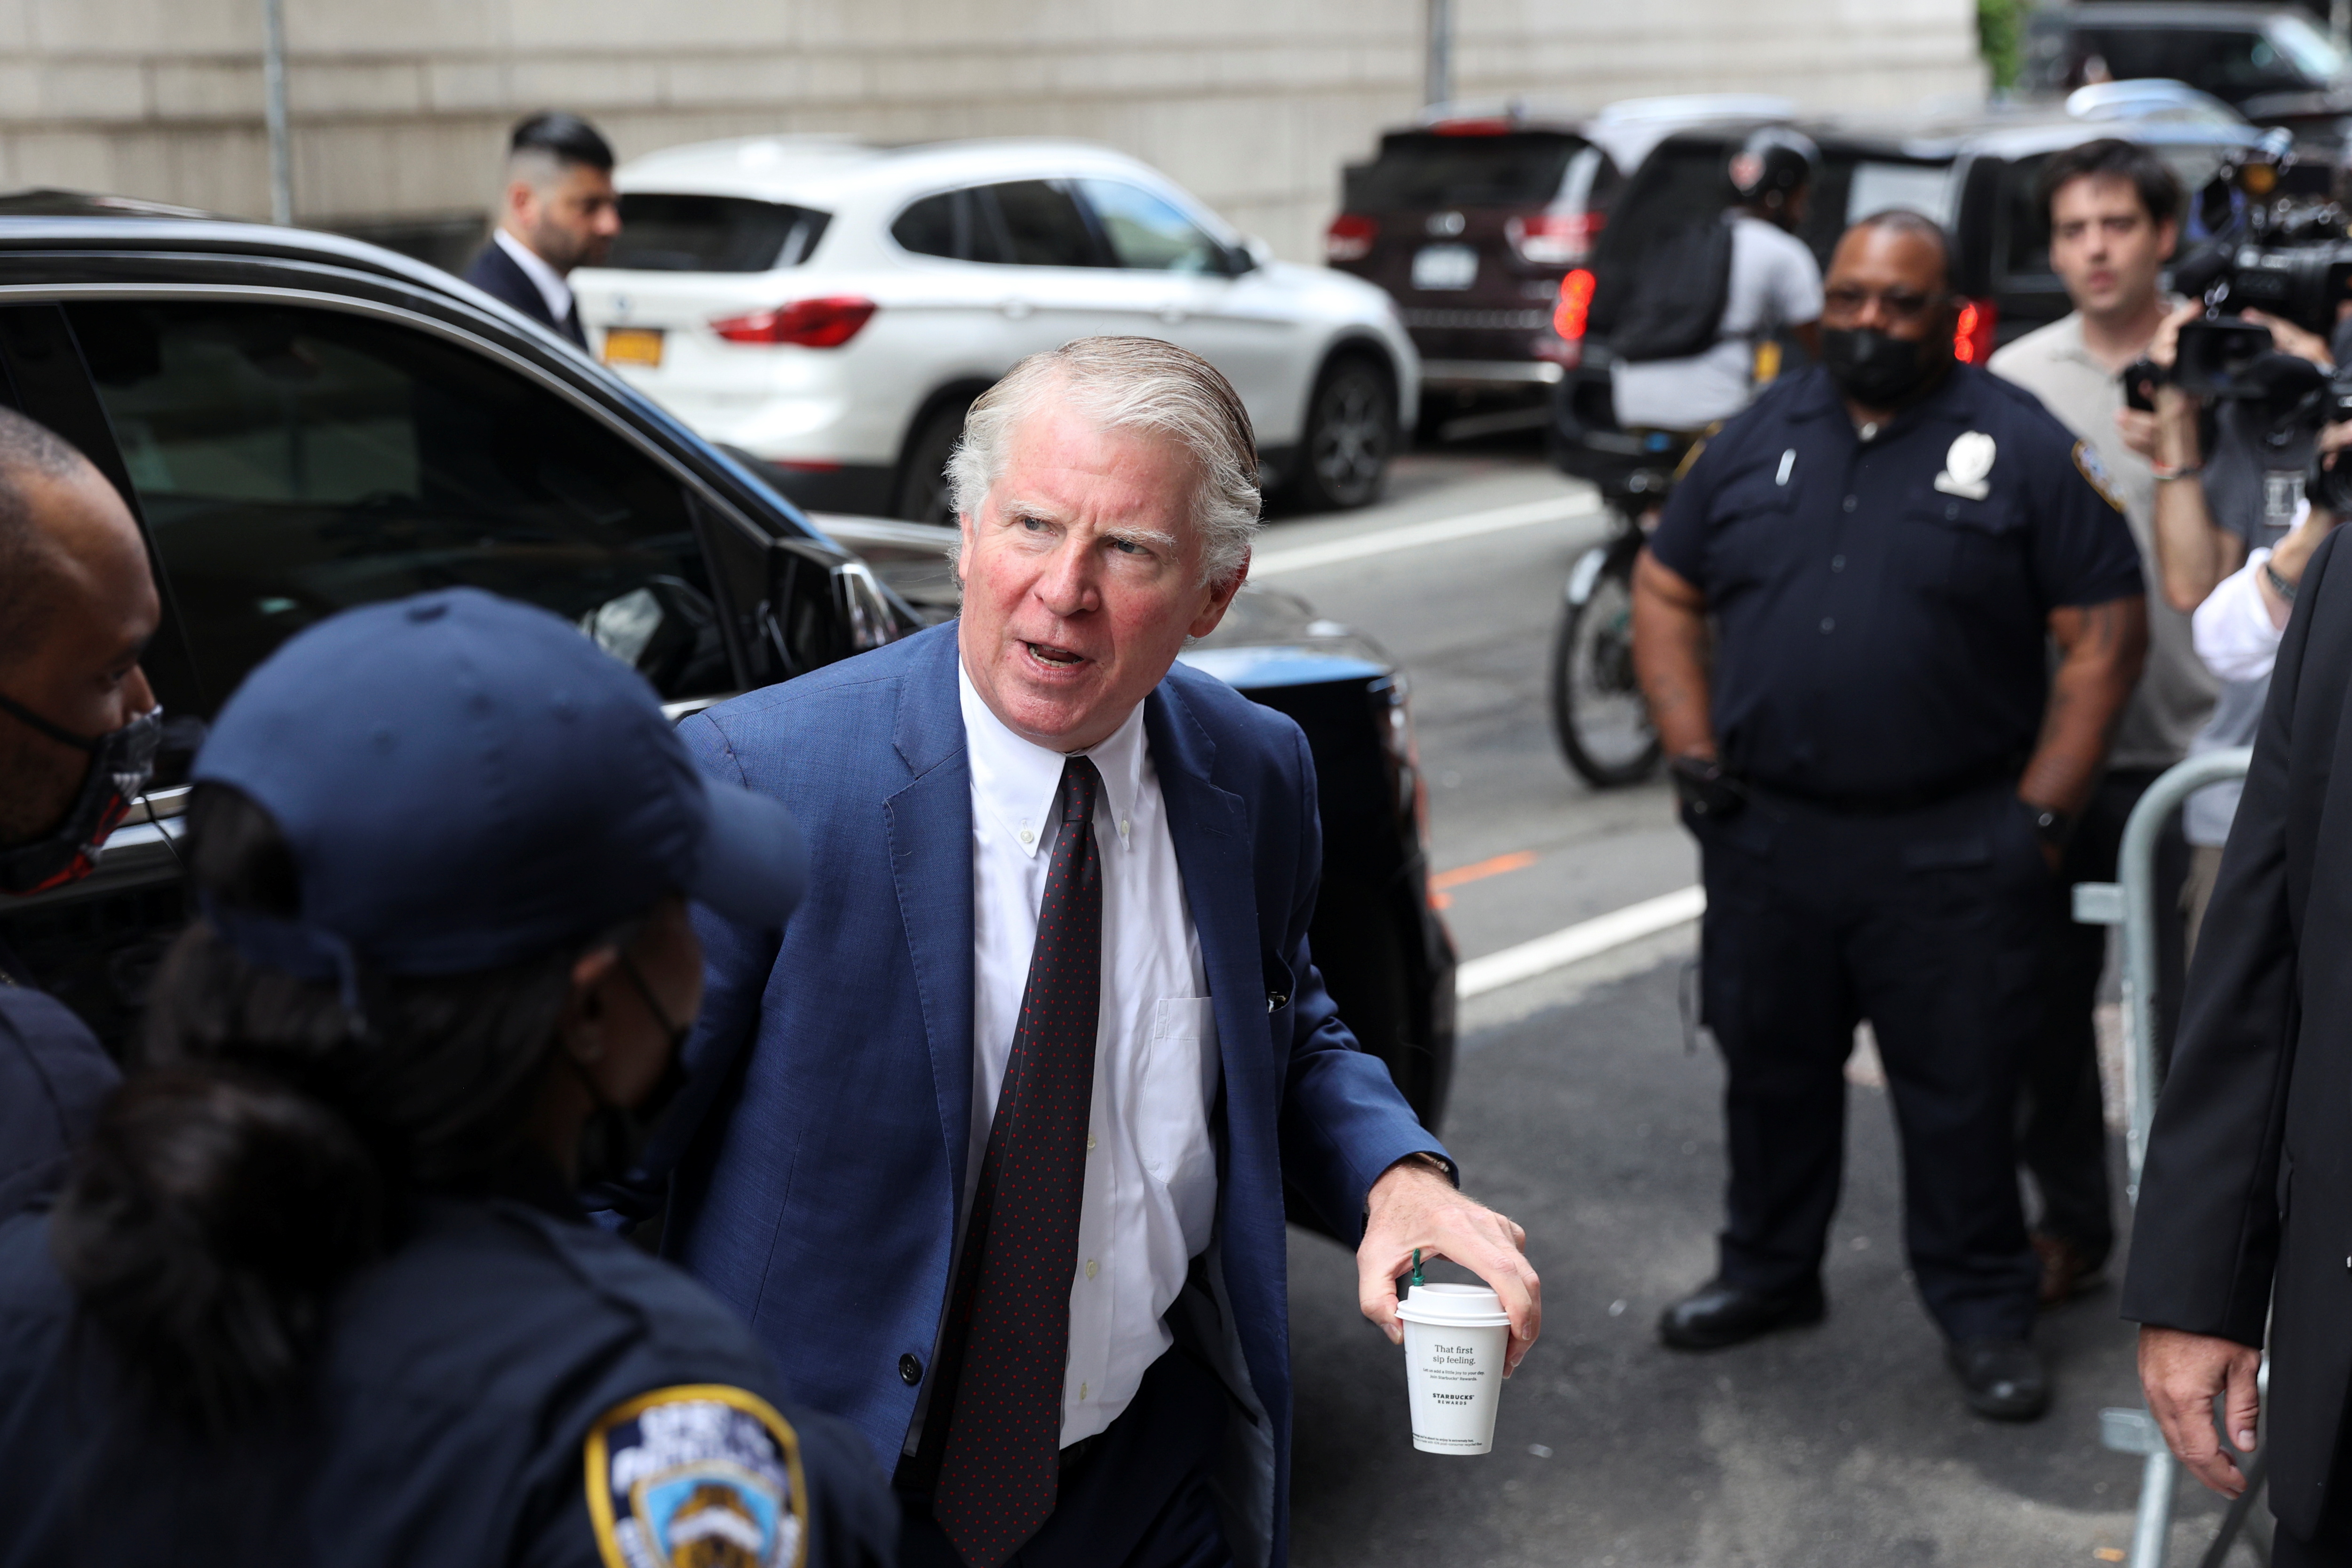 Manhattan district Attorney Cyrus Vance Jr. arrives at the District Attorney’s Office in the Manhattan borough of New York City, New York, U.S., July 1, 2021.   REUTERS/Angus Mordant